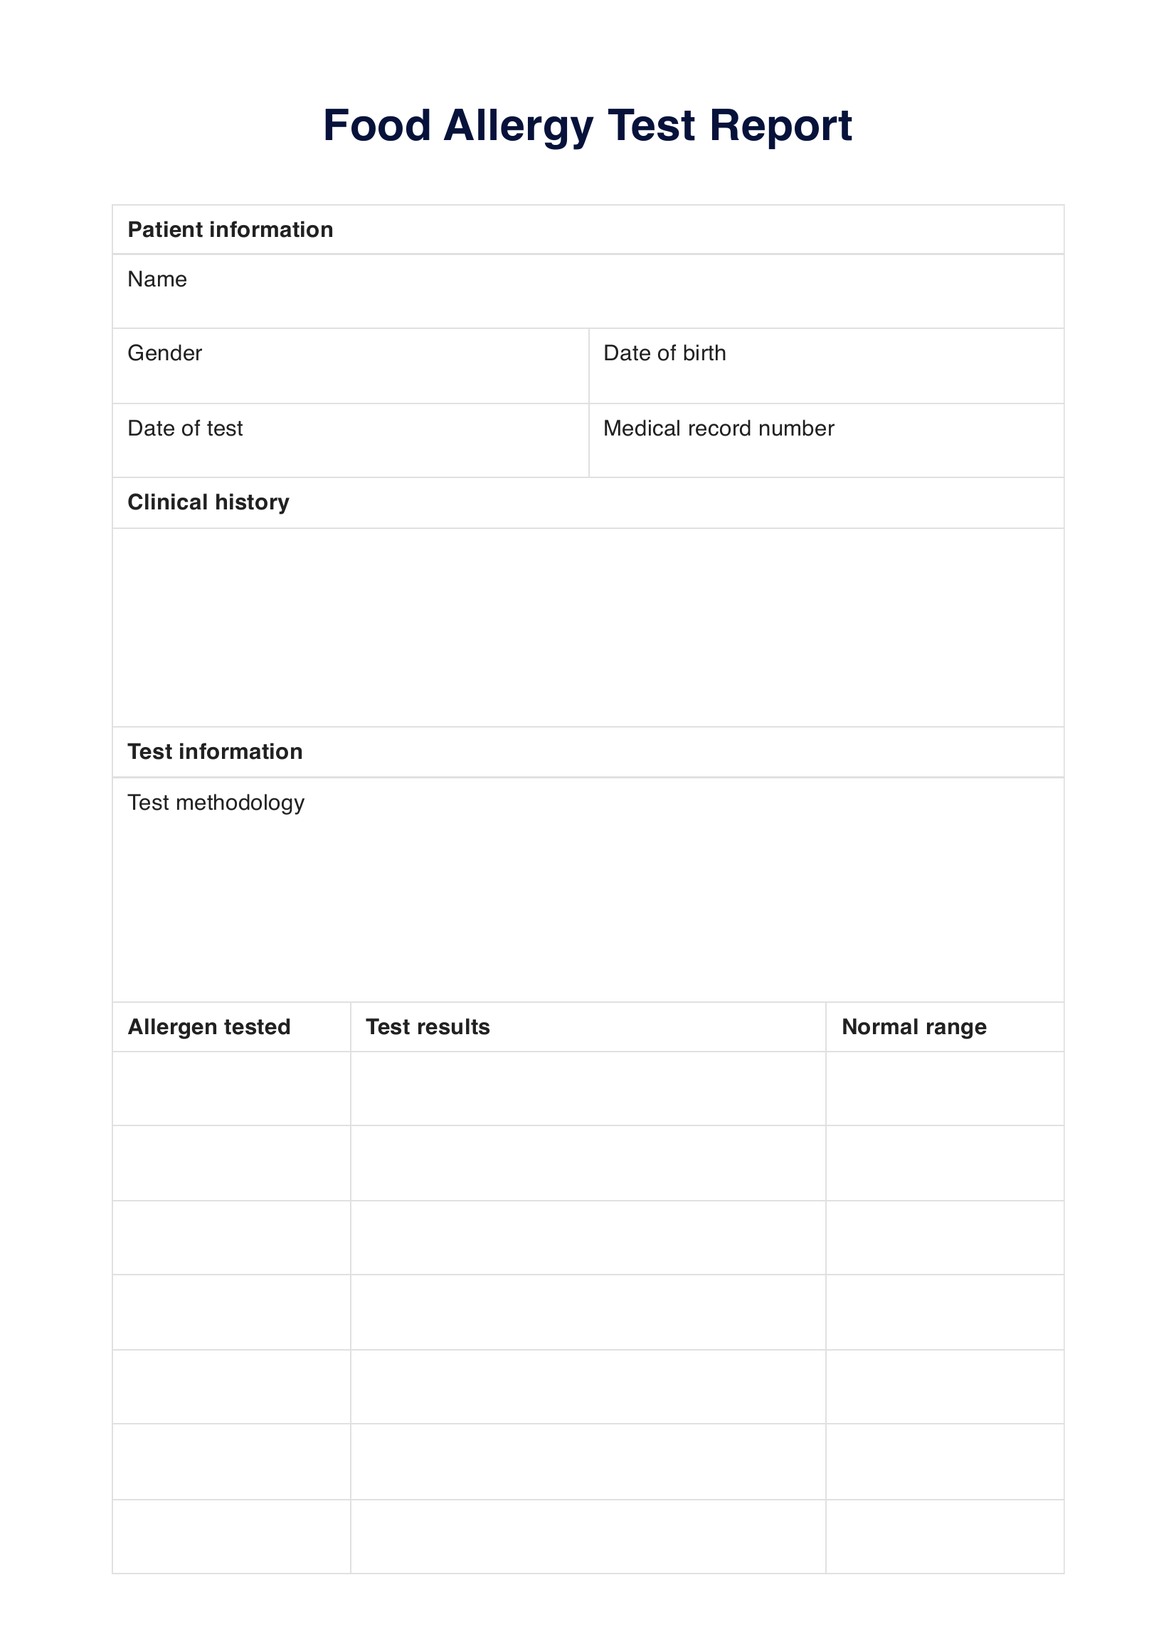 Food Allergy Test Reports PDF Example